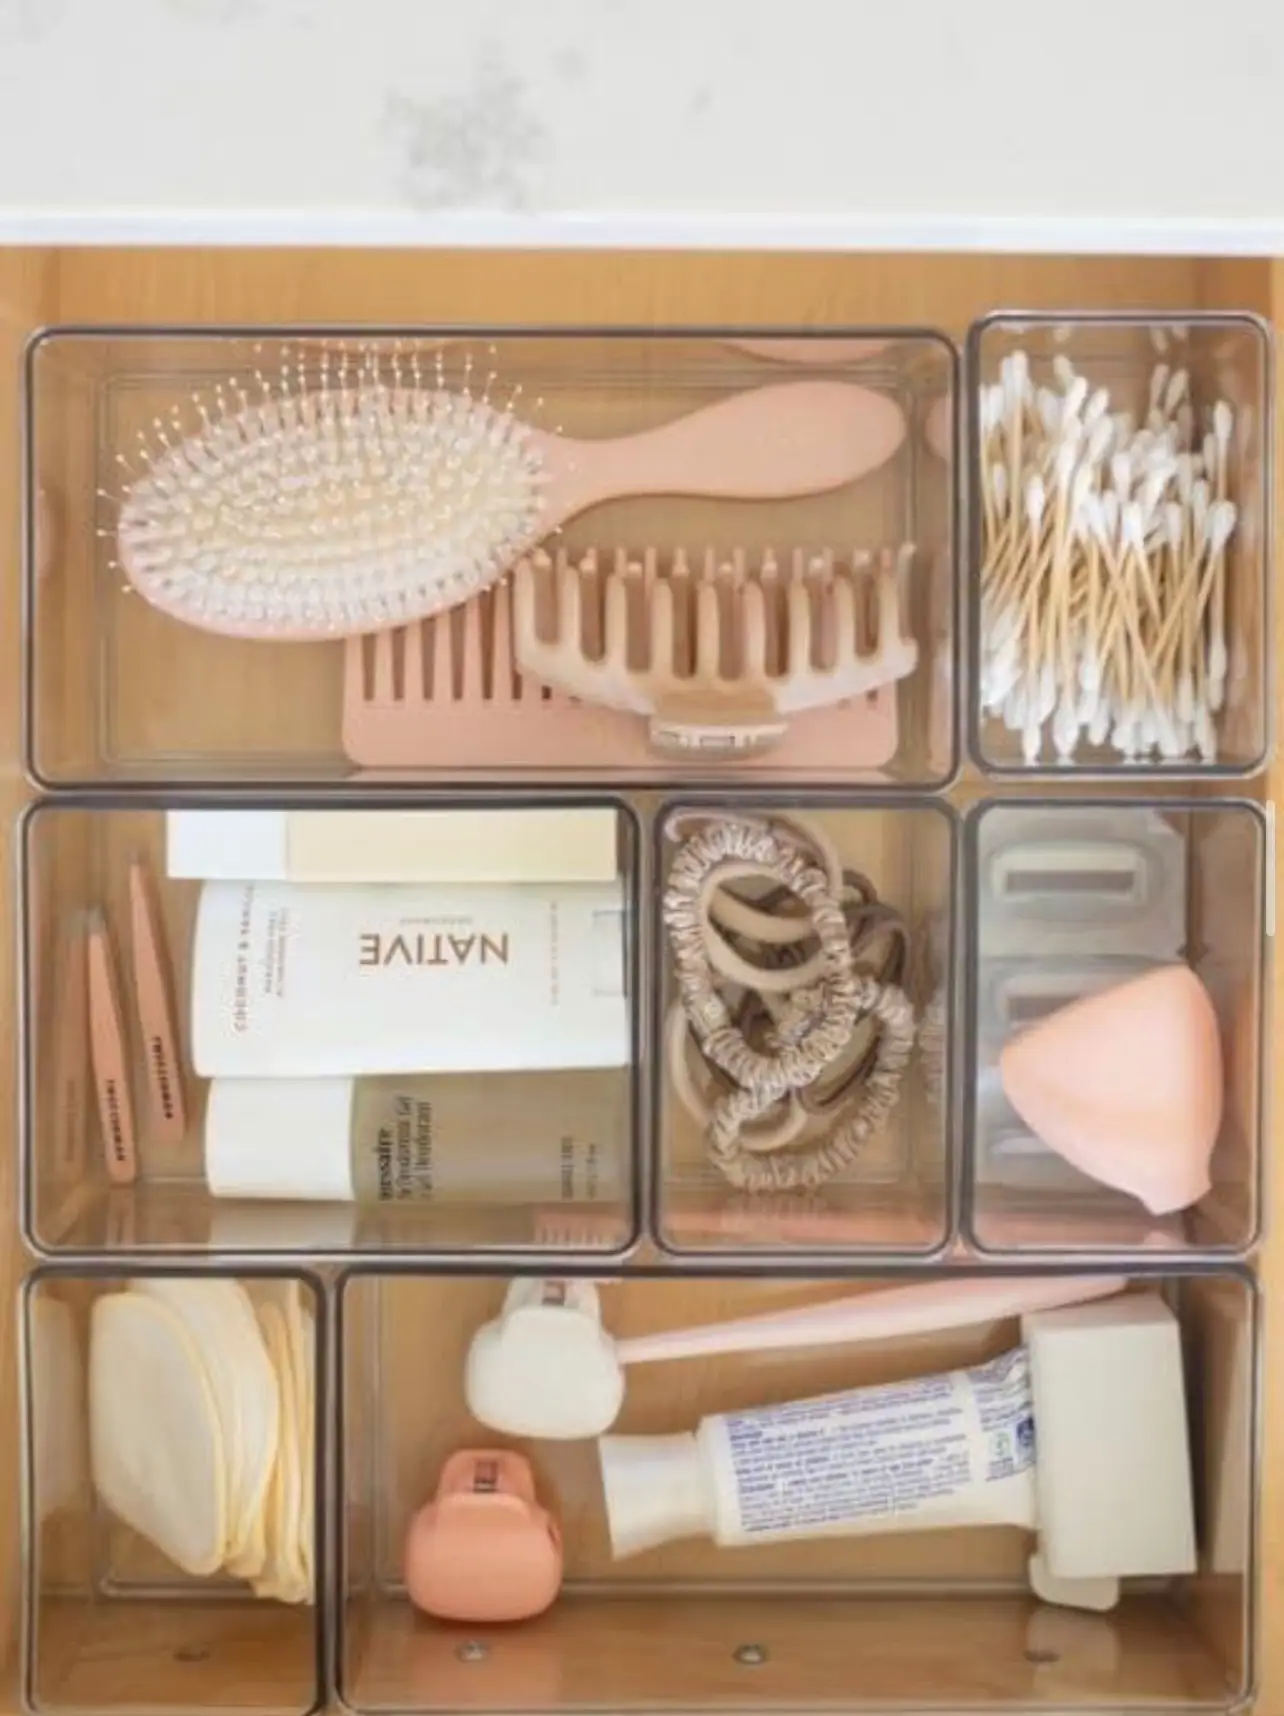  A collection of beauty tools and hair accessories.